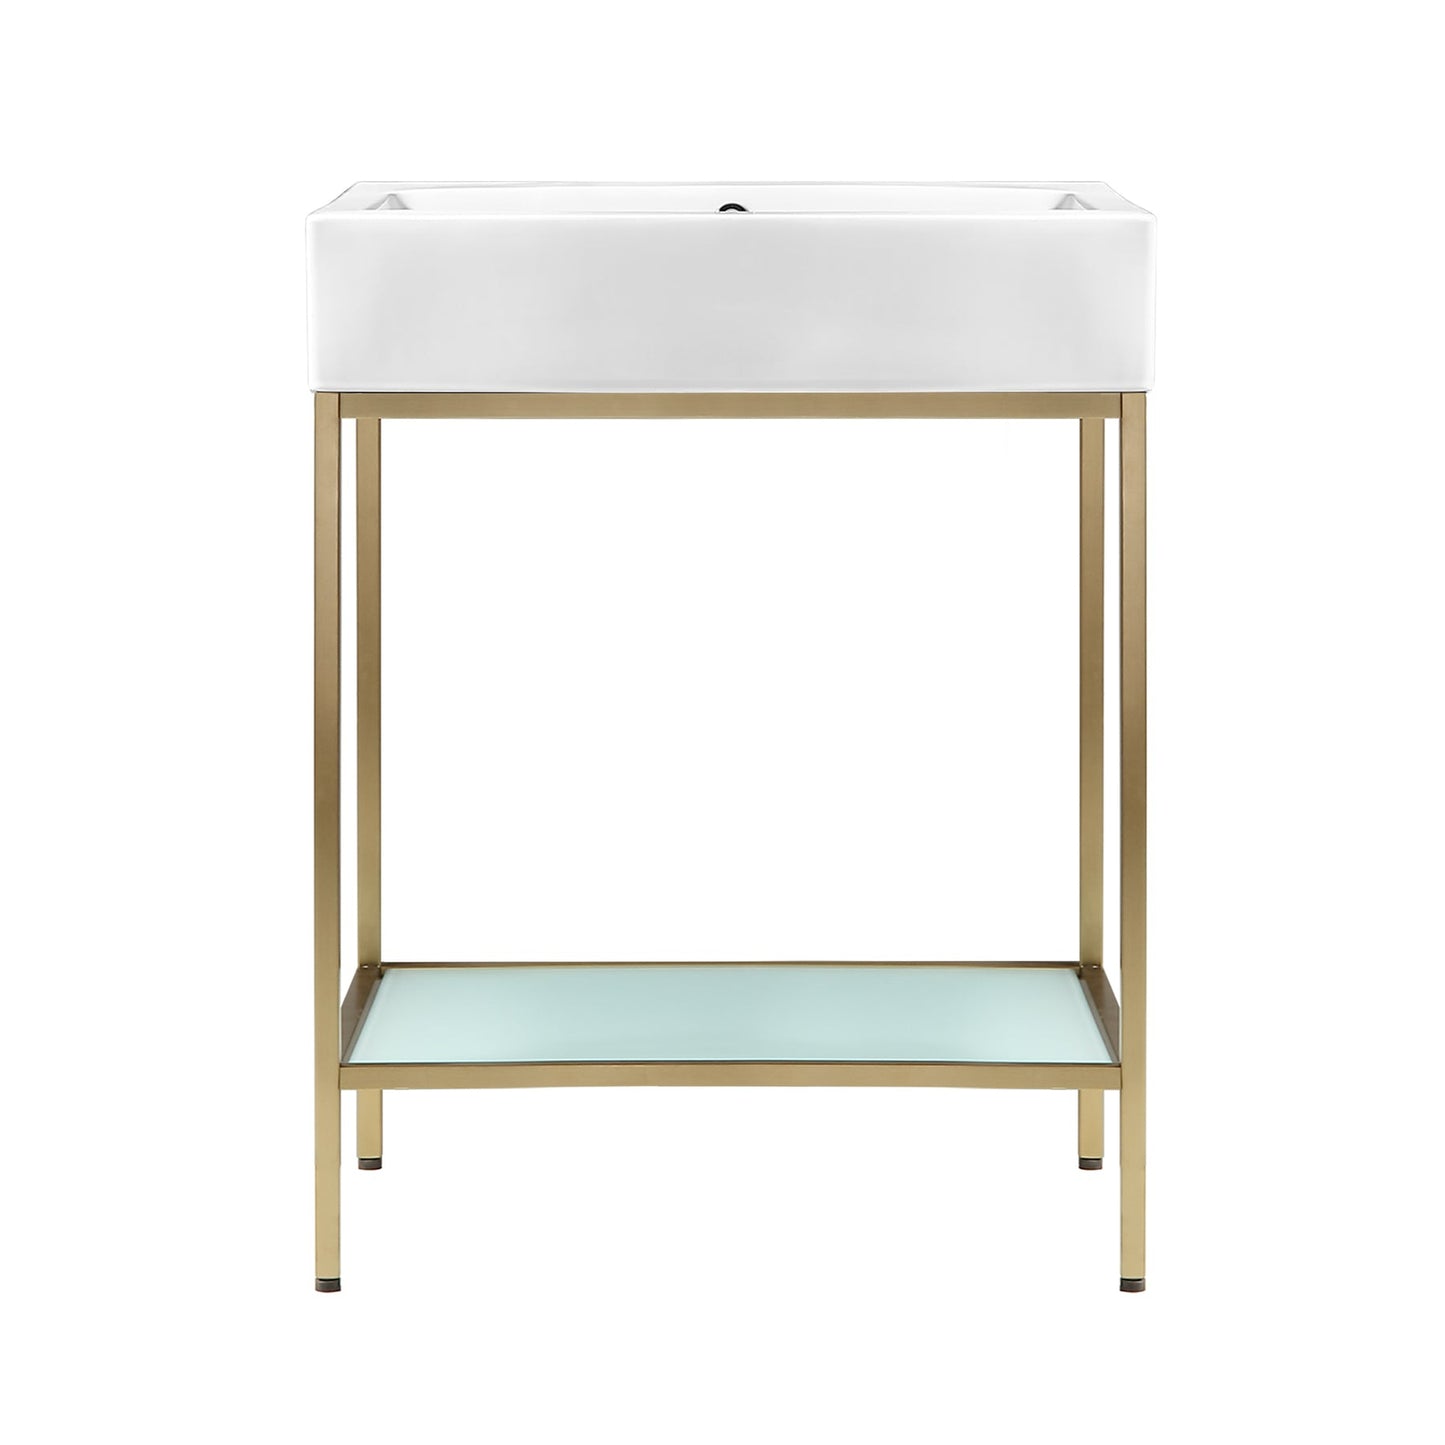 Swiss Madison Pierre 24" x 34" Freestanding White Bathroom Vanity With Ceramic Single Sink and Gold Metal Frame